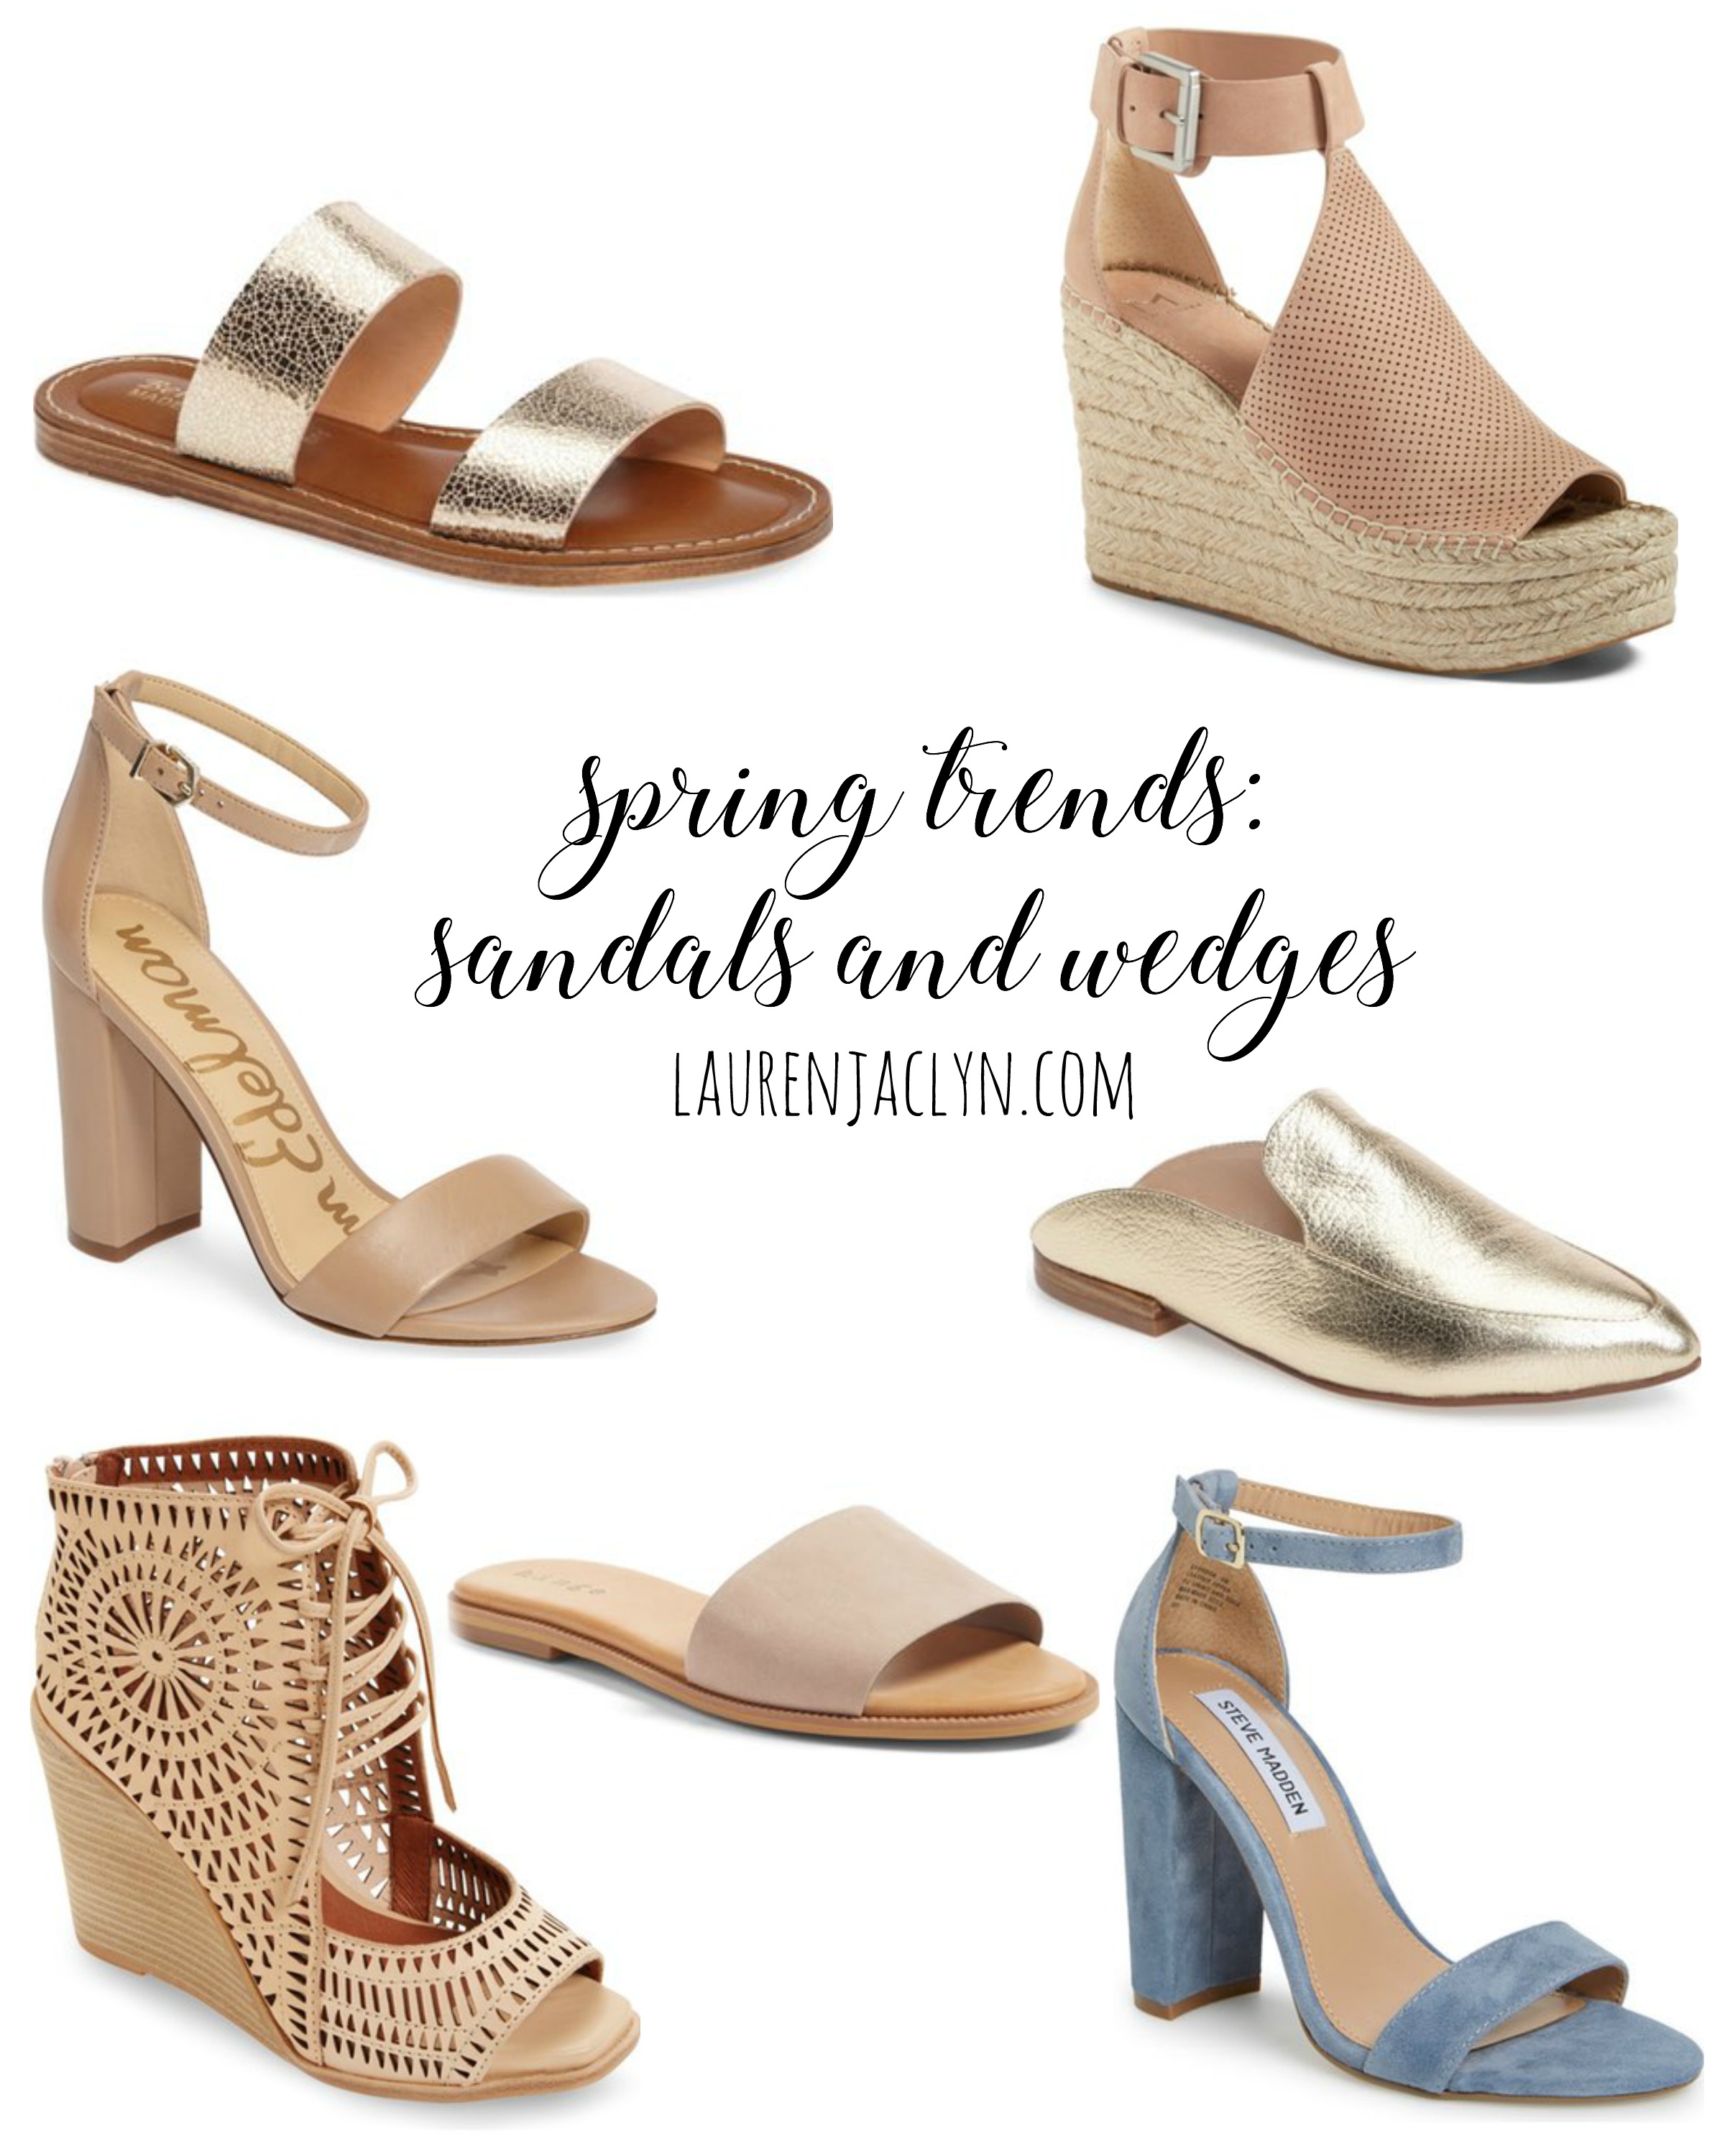 Spring Trends: Sandals and Wedges - LaurenJaclyn.com